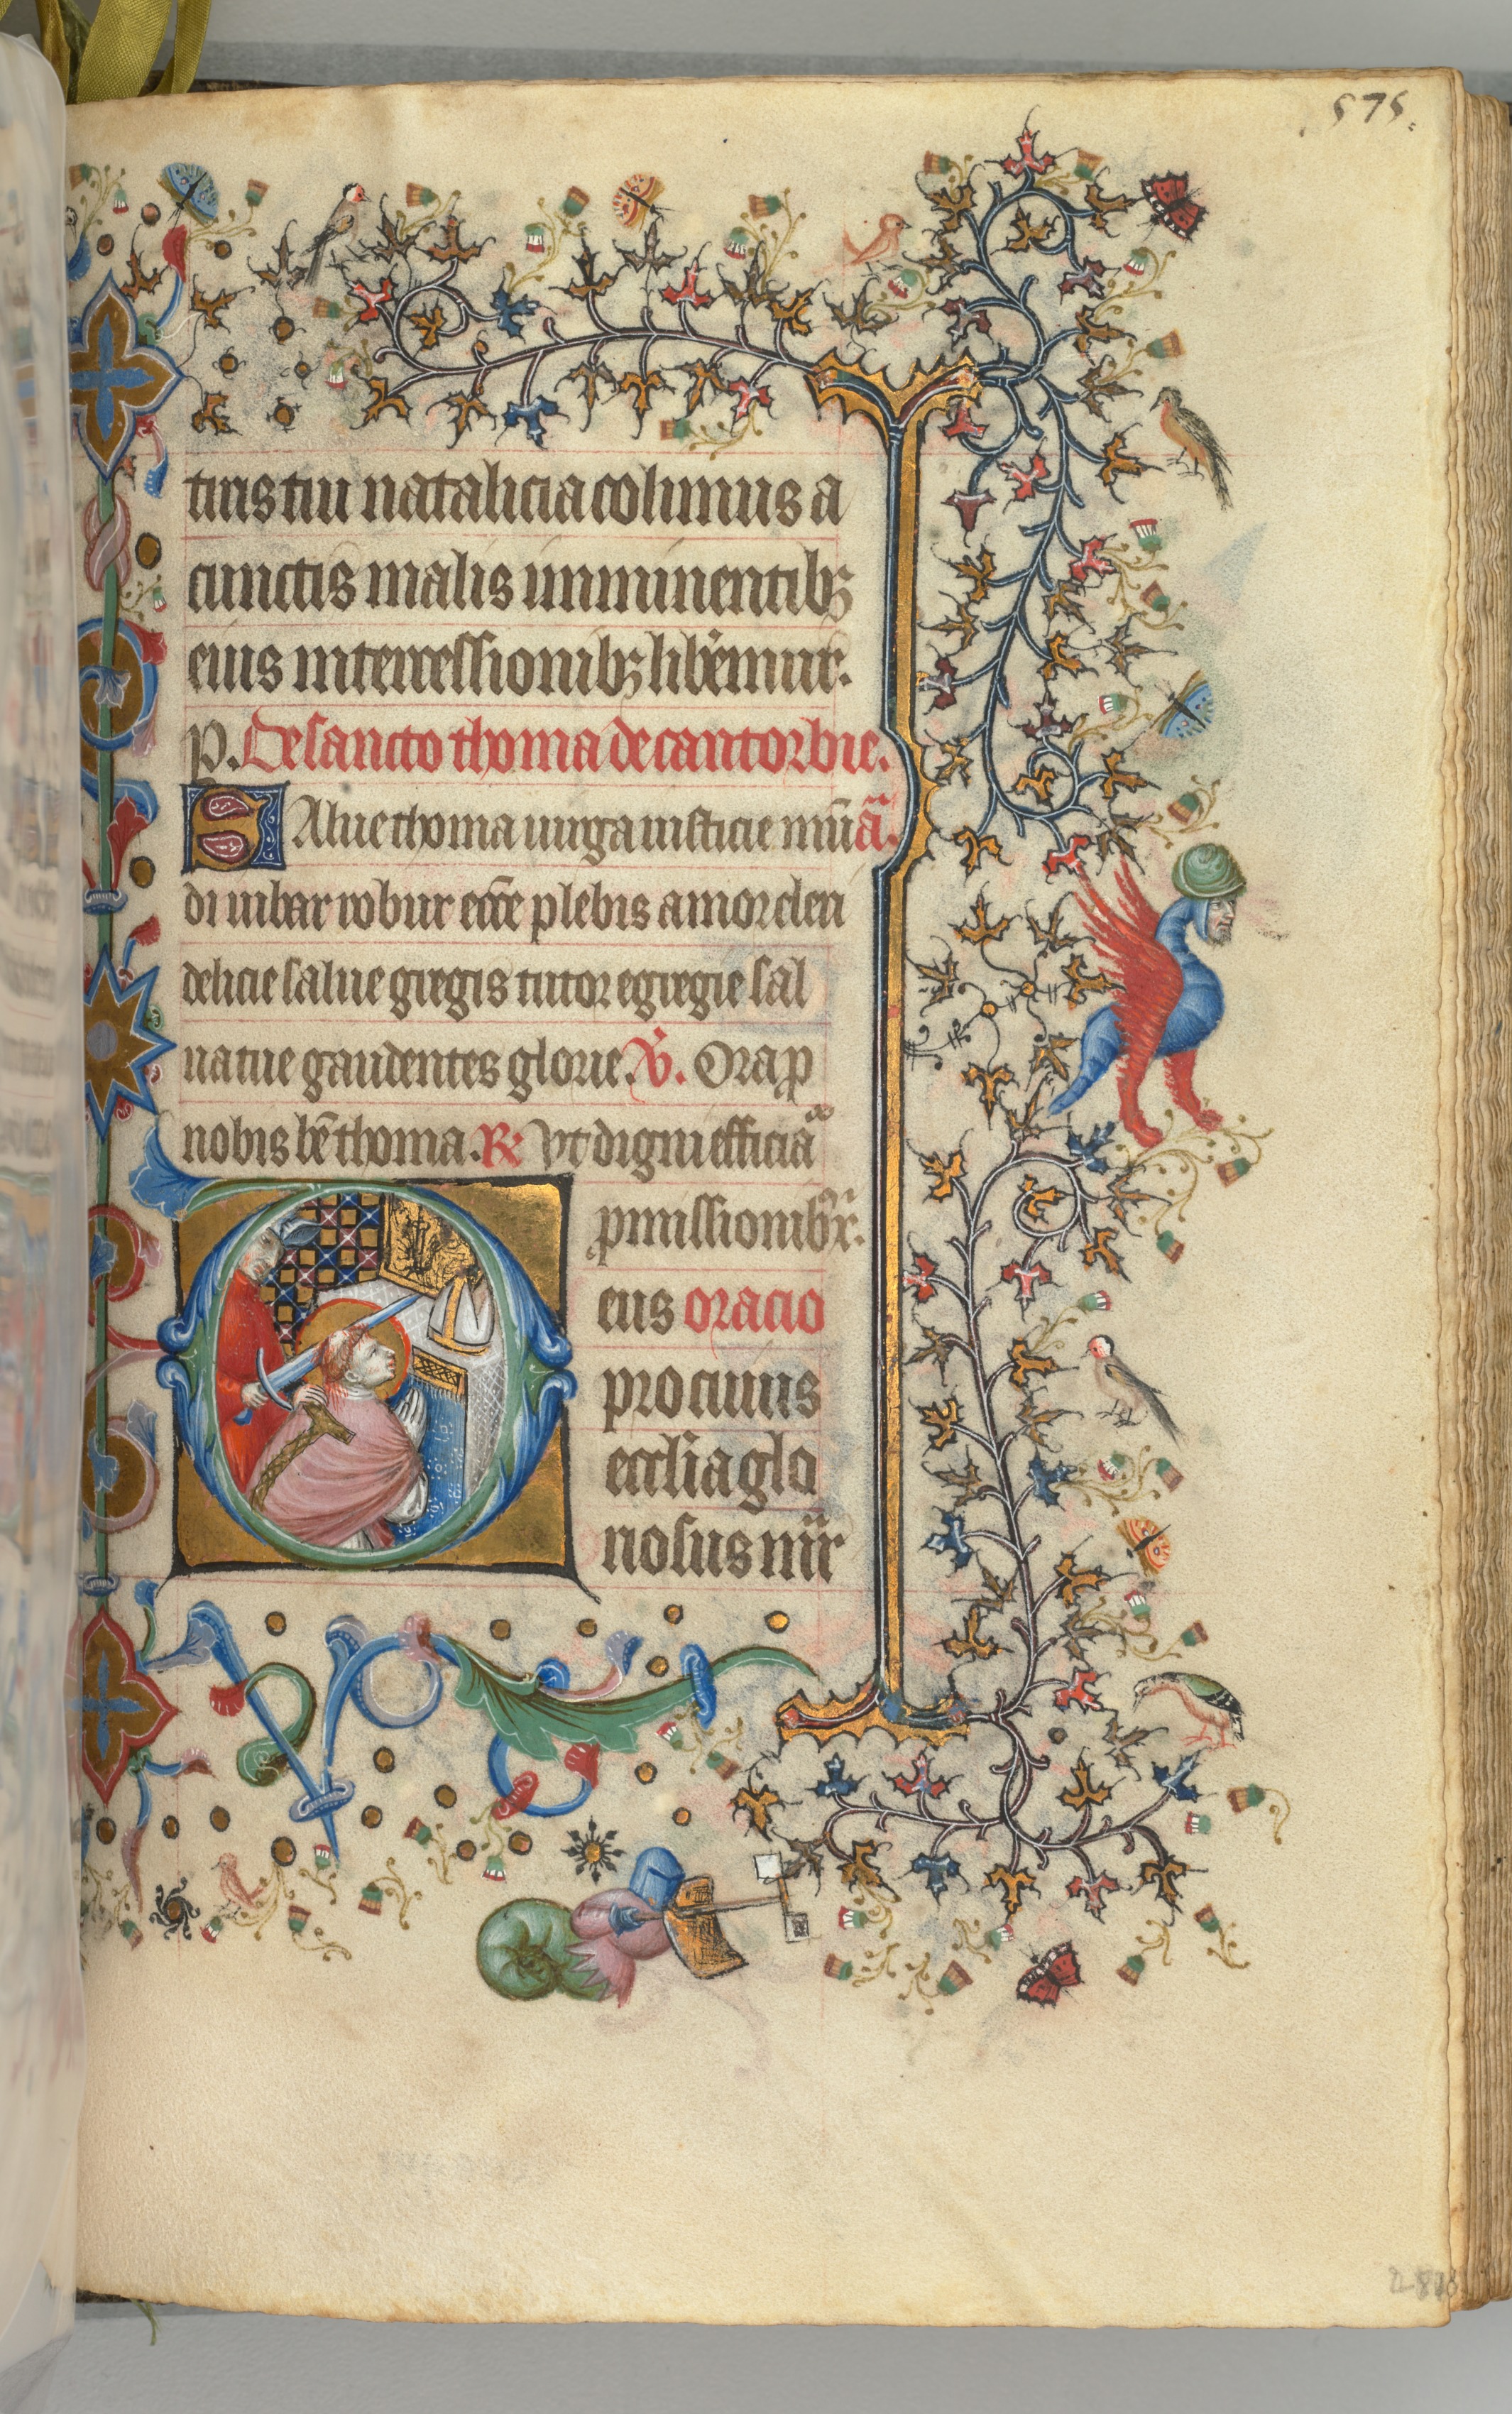 Hours of Charles the Noble, King of Navarre (1361-1425): fol. 282r, St. Thomas à Becket